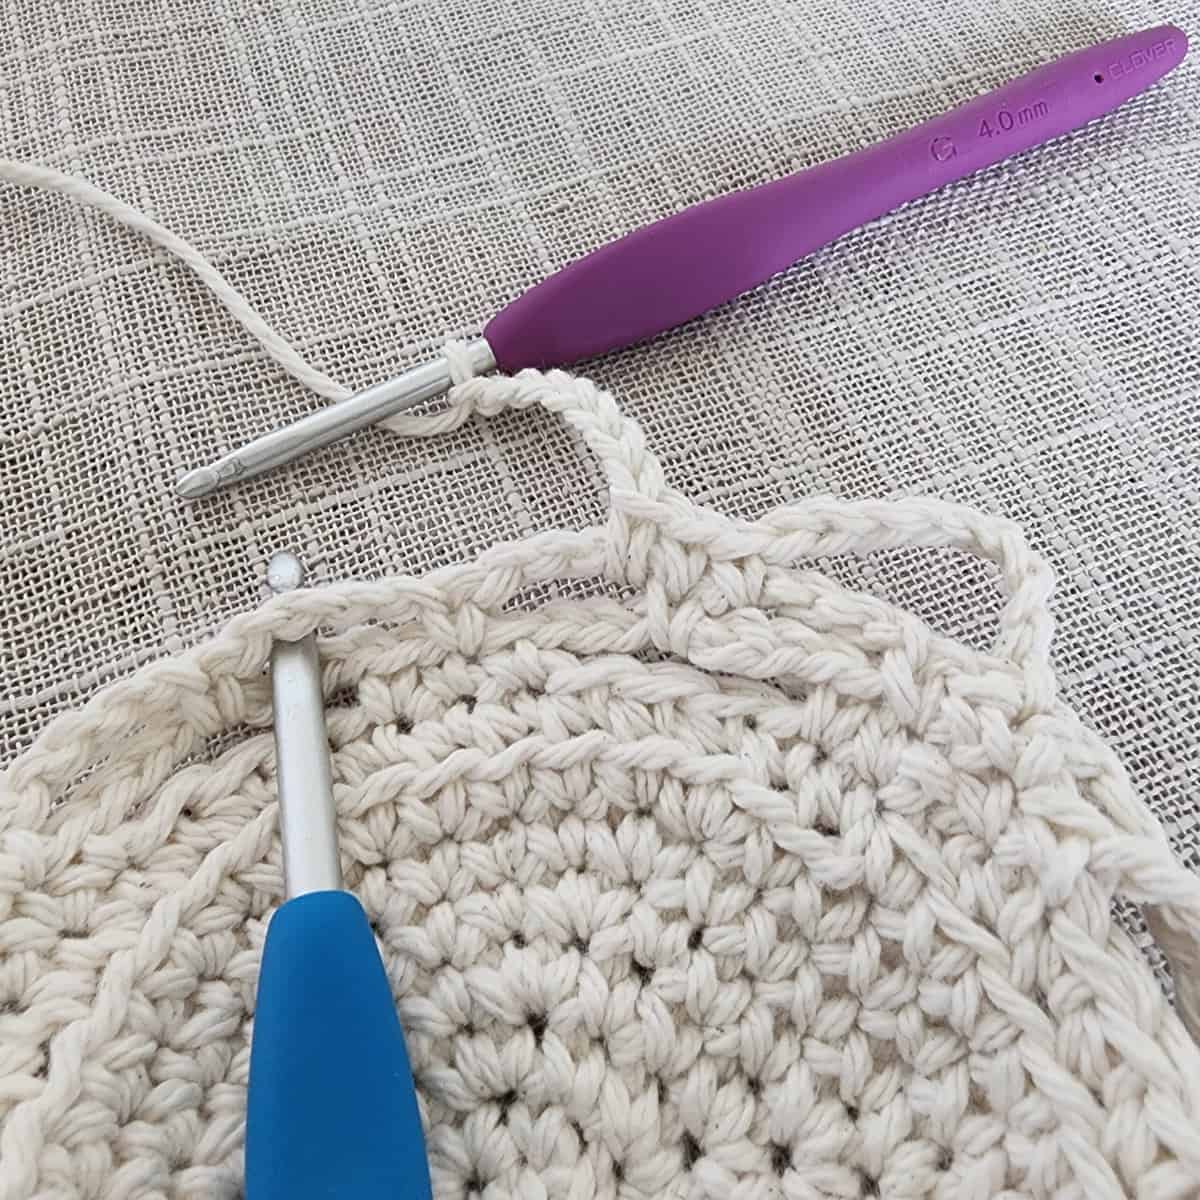 Purple crochet hook crocheting lace and blue crochet hook showing where to work the next stitch.